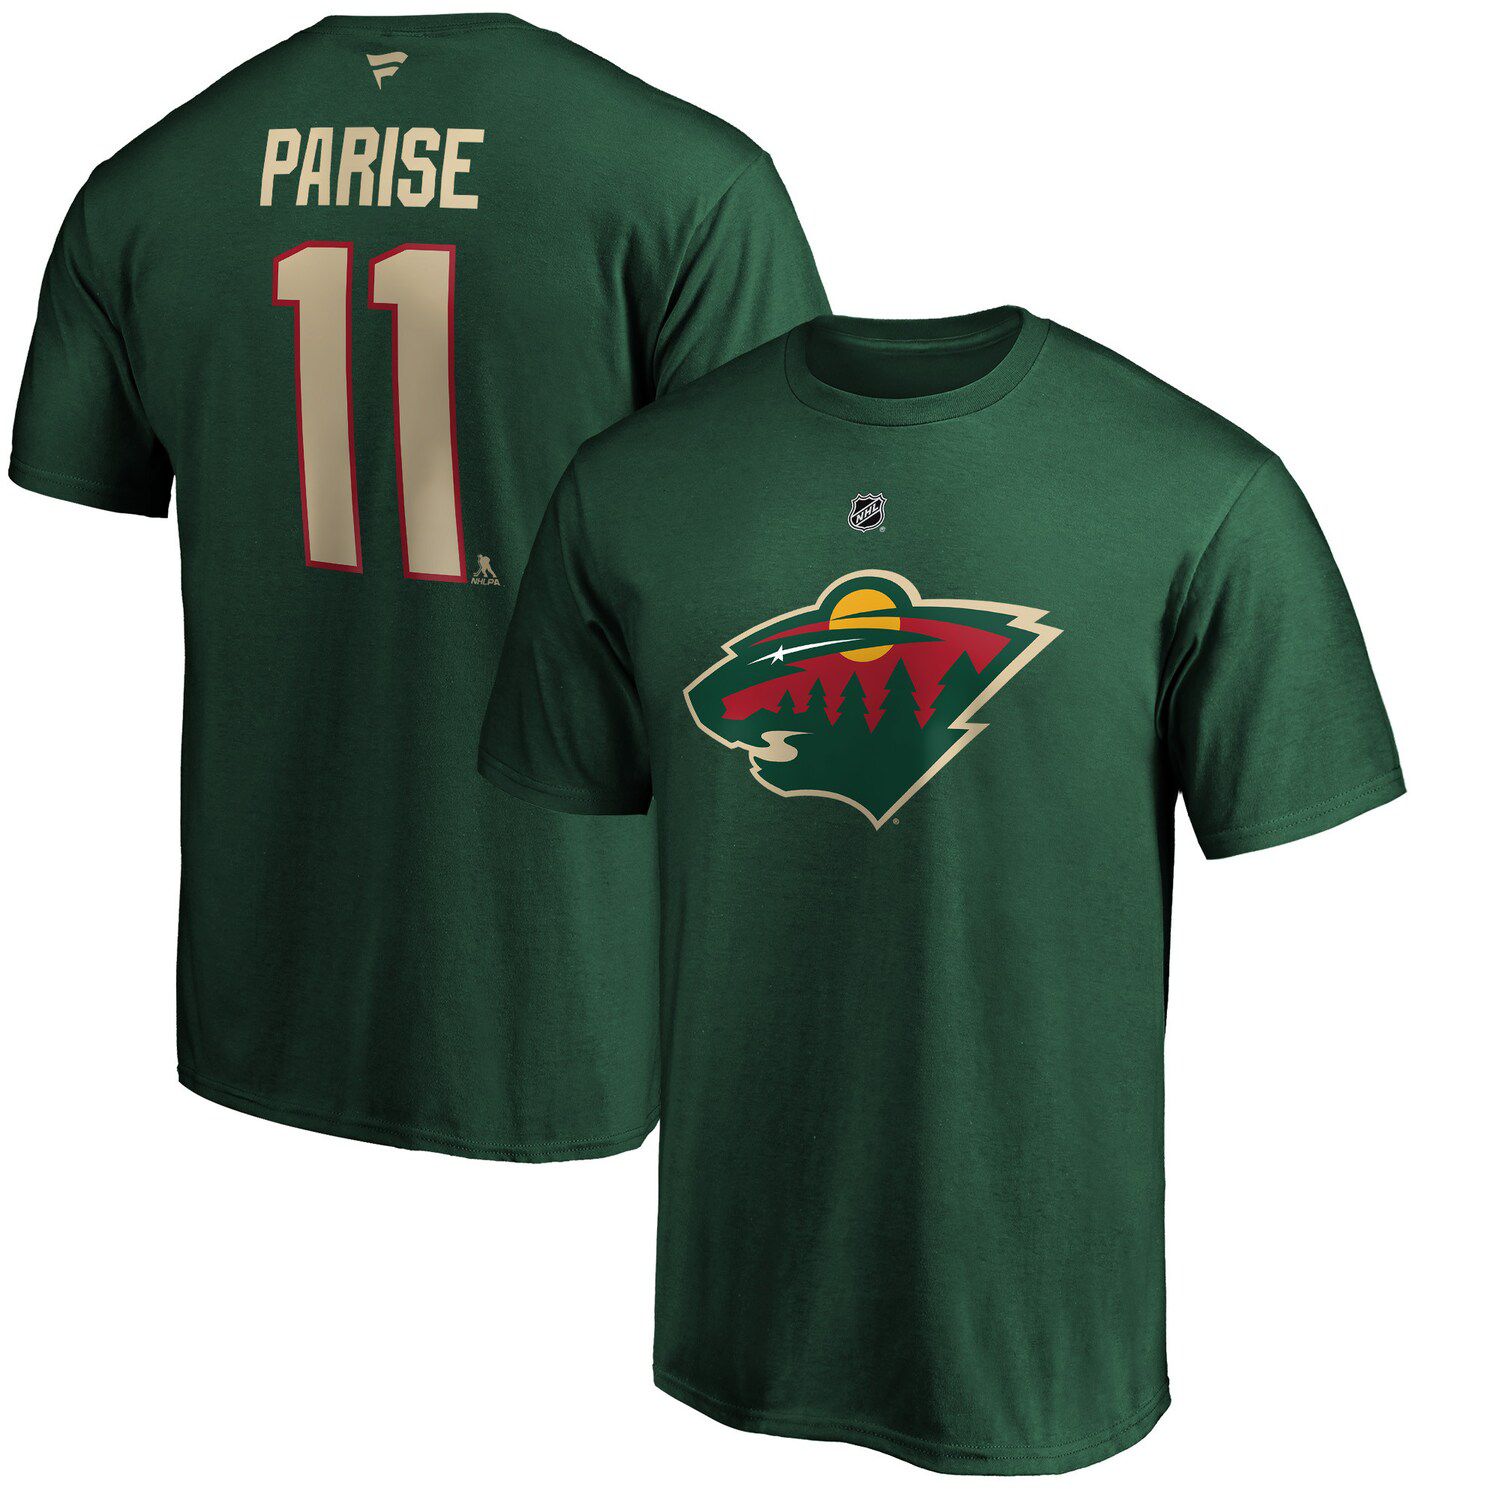 mn wild jersey numbers